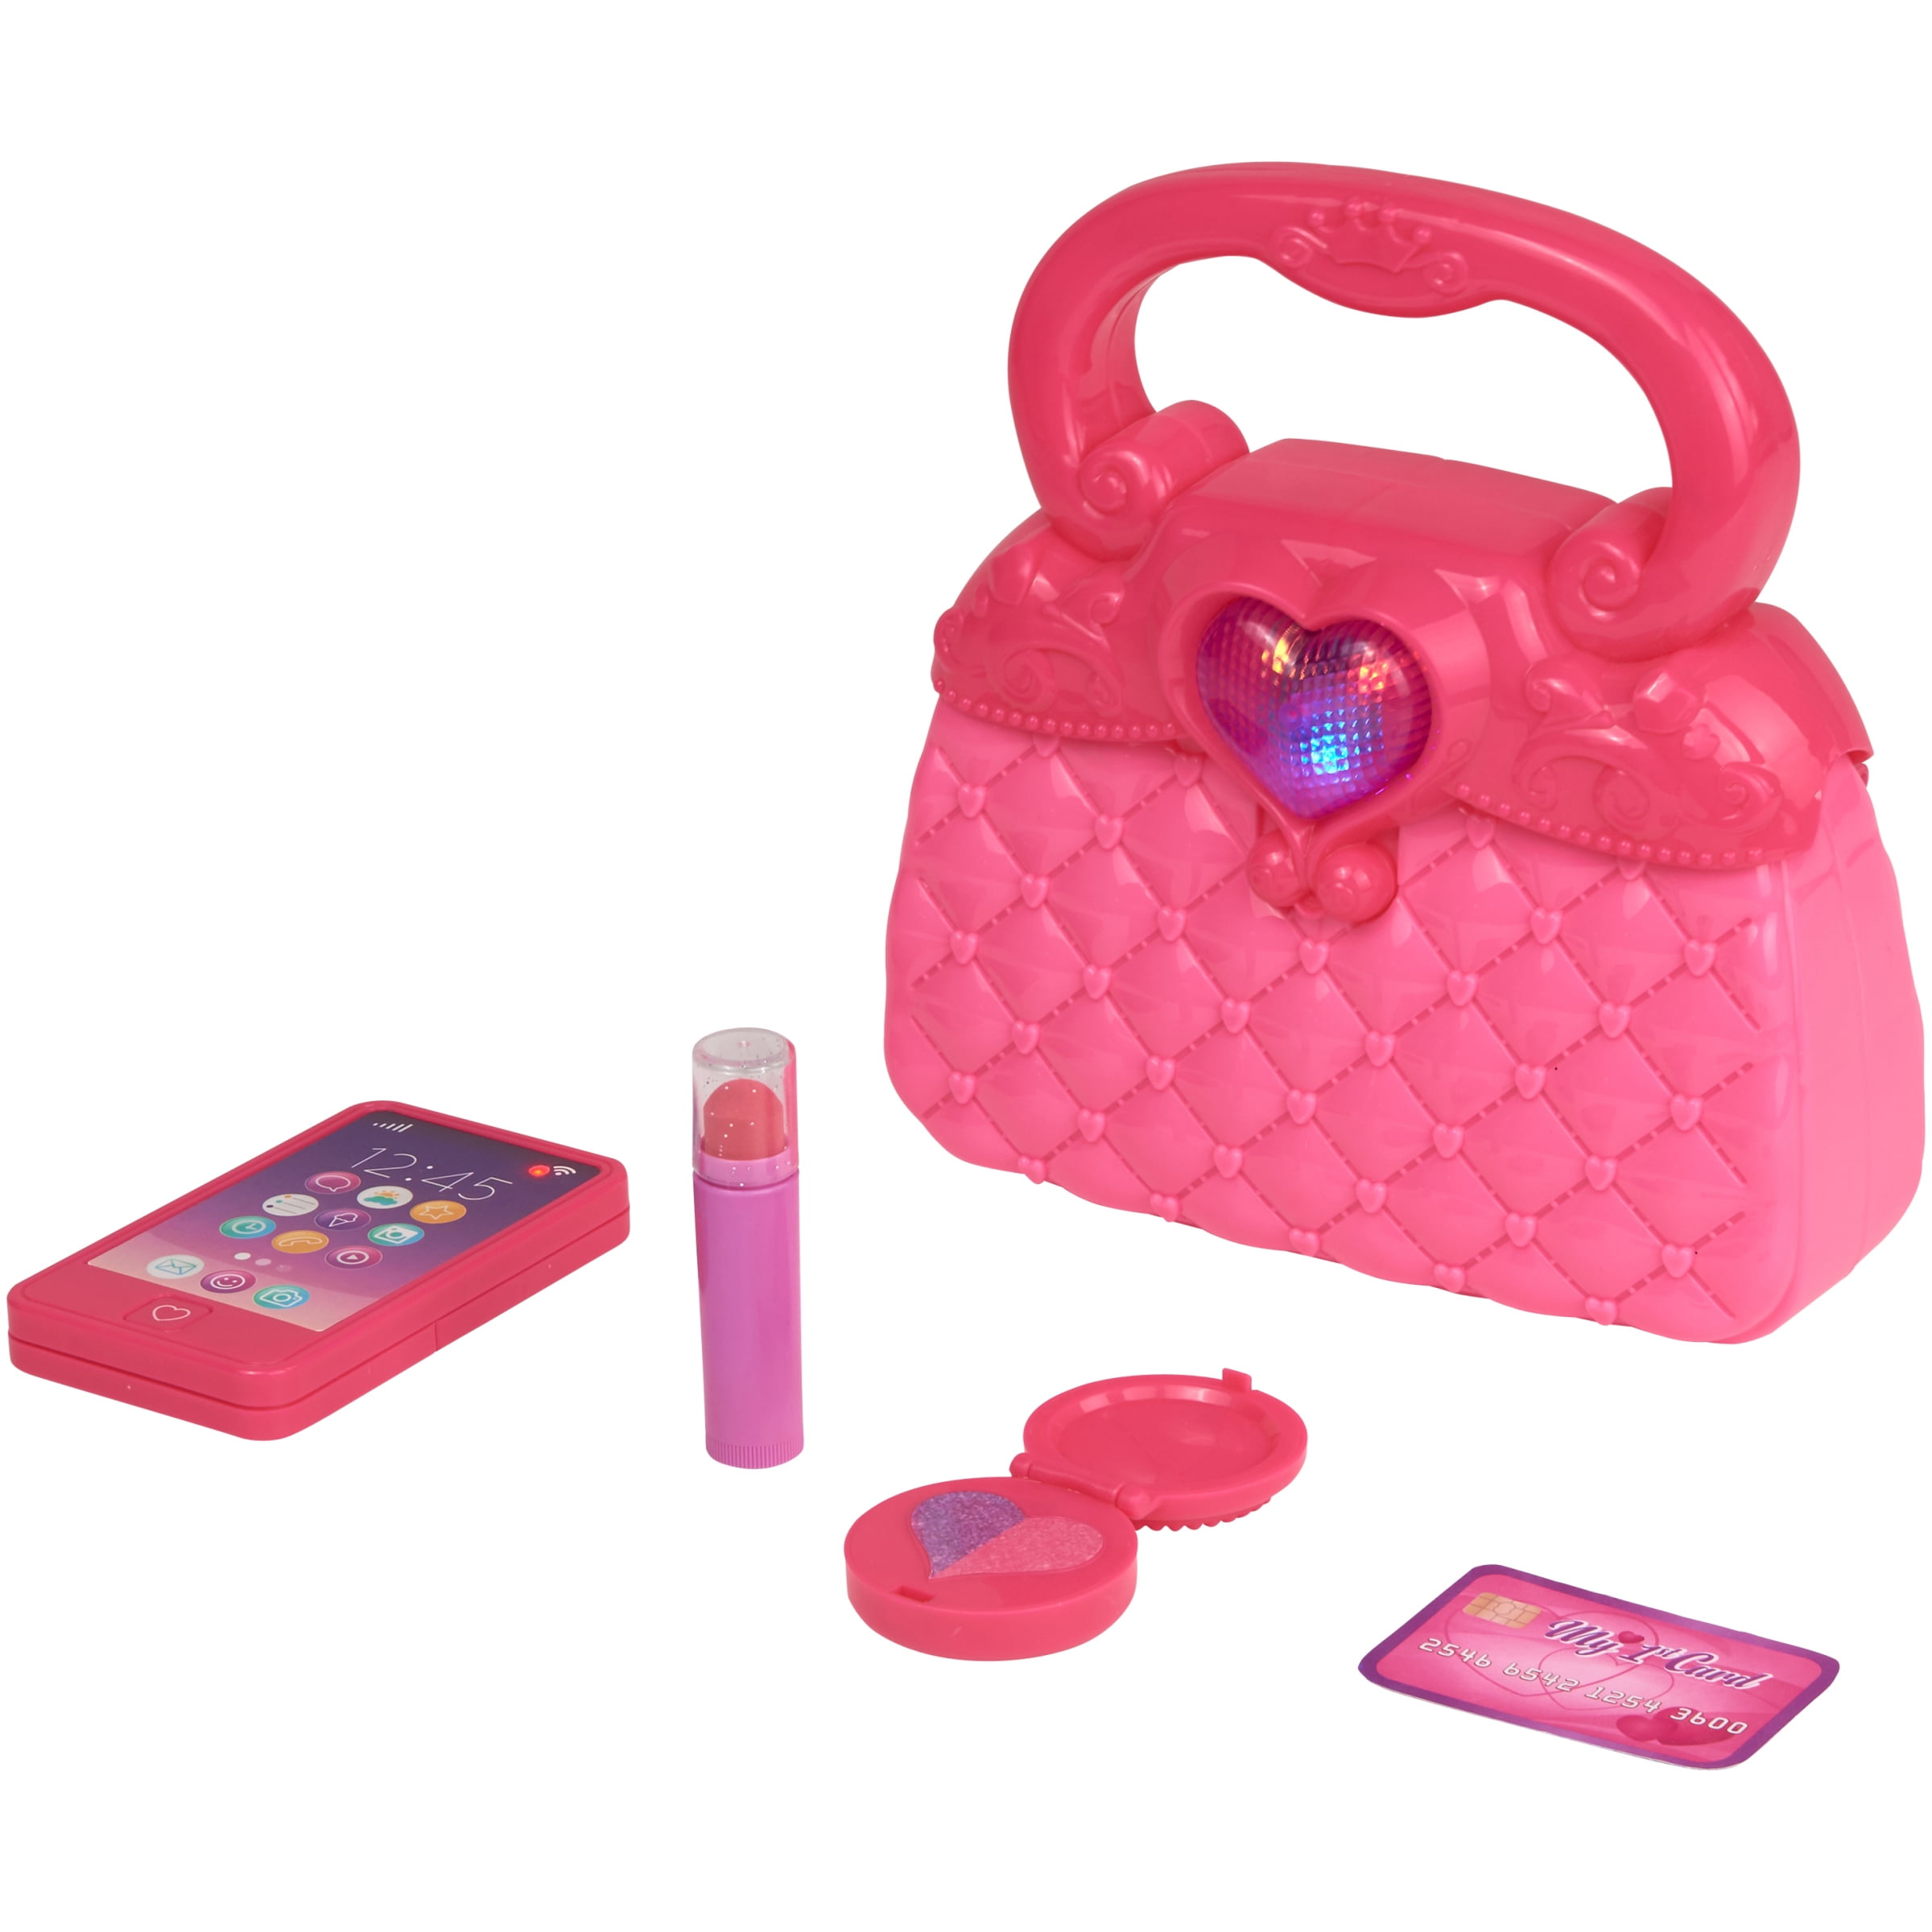 Kid Connection 5 Piece First Purse Play Set Pink with Lights & Sound for Girls 